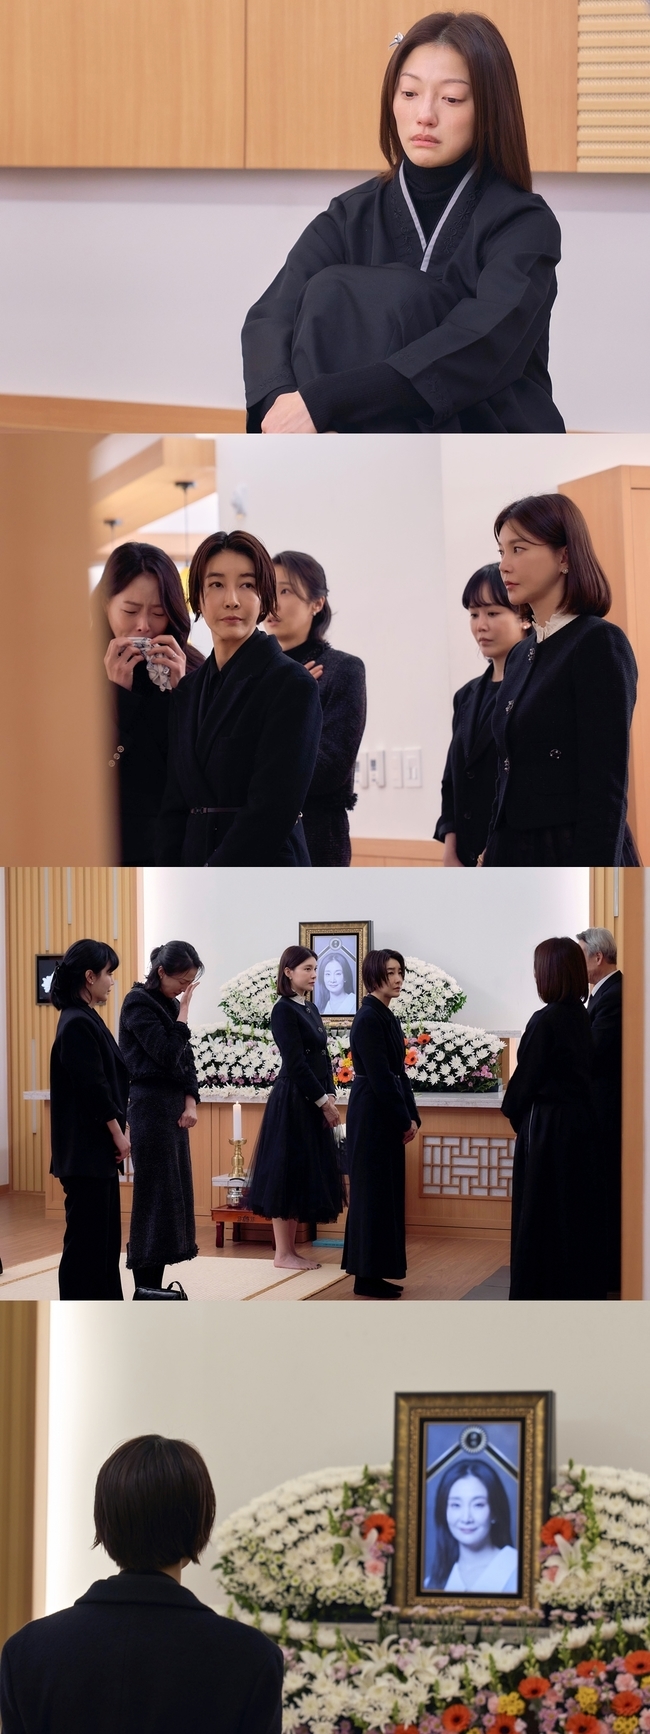 Actor Lee El was caught in the actor Park Hyo-joo The Funeral.ENA tree drama  ⁇  HappinessBattle  ⁇  On June 7, Oh Yoo-Jin released a still cut of The Funeral scene.In the second episode of  ⁇ HappinessBattle ⁇ , which aired on June 1, influencer Oh Yoo-Jin (Park Hyo-joo), who boasted a happy life on SNS, died in a terrible way, causing shock.In the released still cut, Jang Mi-ho (Lee El), who is sitting in mourning and the bereaved family, attracts attention.They even expressed hatred toward each other, which makes Jang Mi-ho, the bereaved family member, even more suspicious.However, Oh Yoo-jin called Jang Mi-ho before he died and left his last words, drawing him into the case.In addition, the Rose of the Funeral chapter shows that there is more affection than hatred in the two No Strings Attached, unlike when expressing anger to Oh Yoo-Jin.I am curious as to what happened to No Strings Attached in the past two people and what became such a deep love affair.In the Funeral Chapter, Song Jung-a (Jin Seo-yeon), Kim Na-young (Cha Ye-ryun), who competed with Oh Yoo-Jin fiercely for Happiness, and other Heriniti kindergarten mothers are also in attendance.Oh Yoo-Jin, who kept a thorough secret about his family, so the existence of Rosho is also a question for Herinity Mothers.Among them, Song Jung-a is a sphere with Rosho, and at that time, Rosho explained that Jasin was a bank employee who came to Oh Yoo-Jin to make an advertisement proposal. I wonder how Song Jung-a who met Rosho again will react. ⁇ HappinessBattle ⁇  Officials are deeply involved in his world with the death of  ⁇ Oh Yoo-Jin. The Funeral Chapter is the first step in entering the world of Oh Yoo-Jin.Here, Rosho thinks again about Jasins feelings about Oh Yoo-Jin, and meets the people of Oh Yoo-Jin.  ⁇  Lee El expresses the complicated heart of Rosho with delicate acting.Lee Els immersion, which will be missed at the moment of seeing, is also expected to pay attention to the high performance.